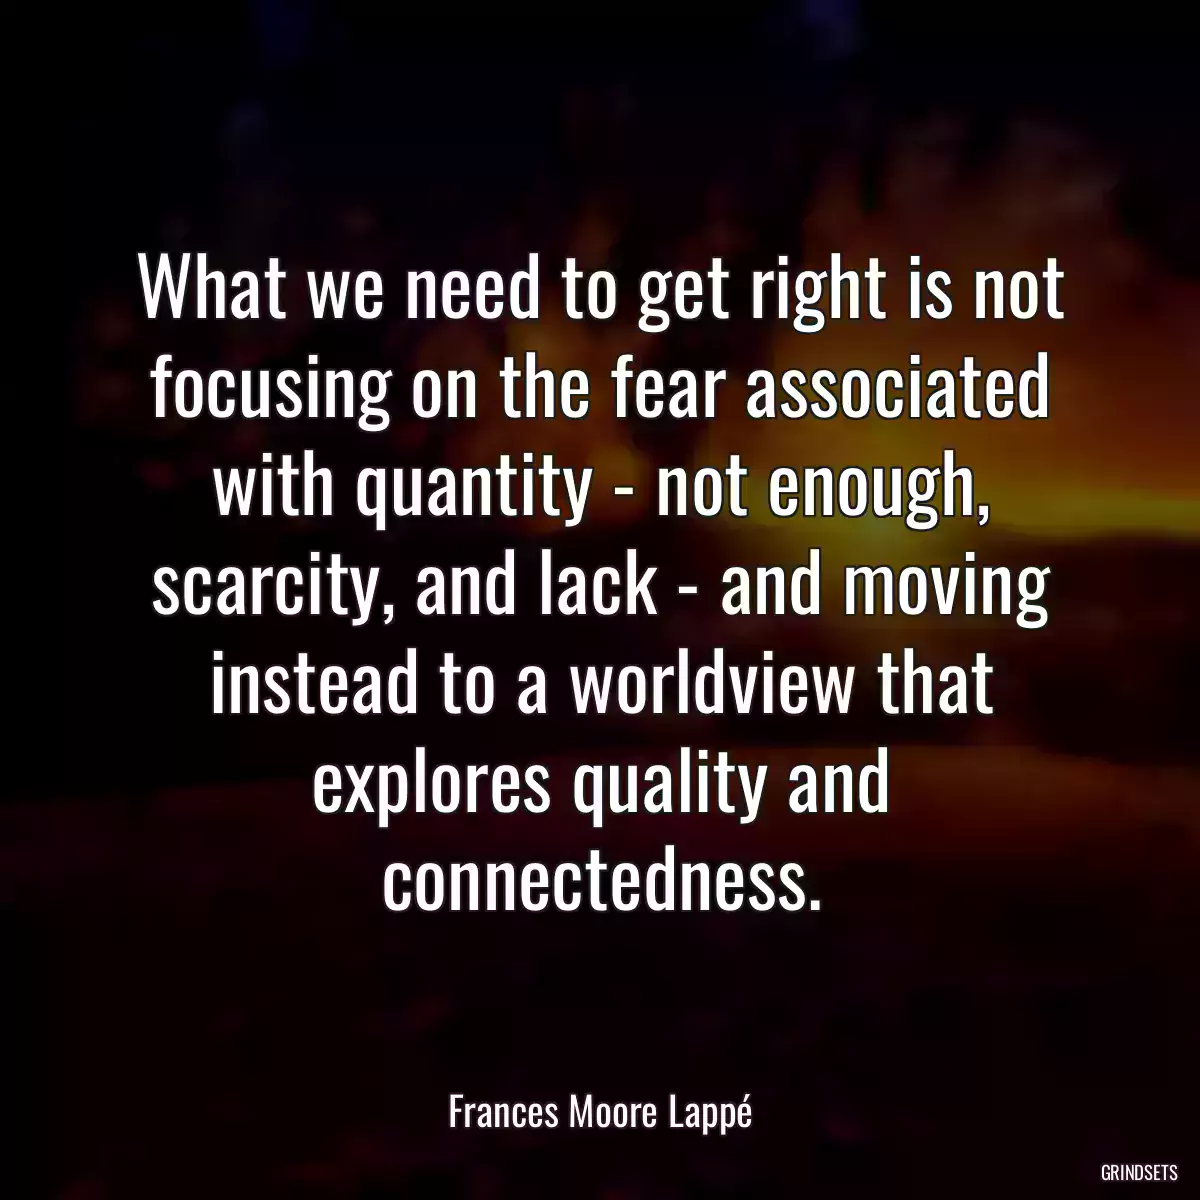 What we need to get right is not focusing on the fear associated with quantity - not enough, scarcity, and lack - and moving instead to a worldview that explores quality and connectedness.